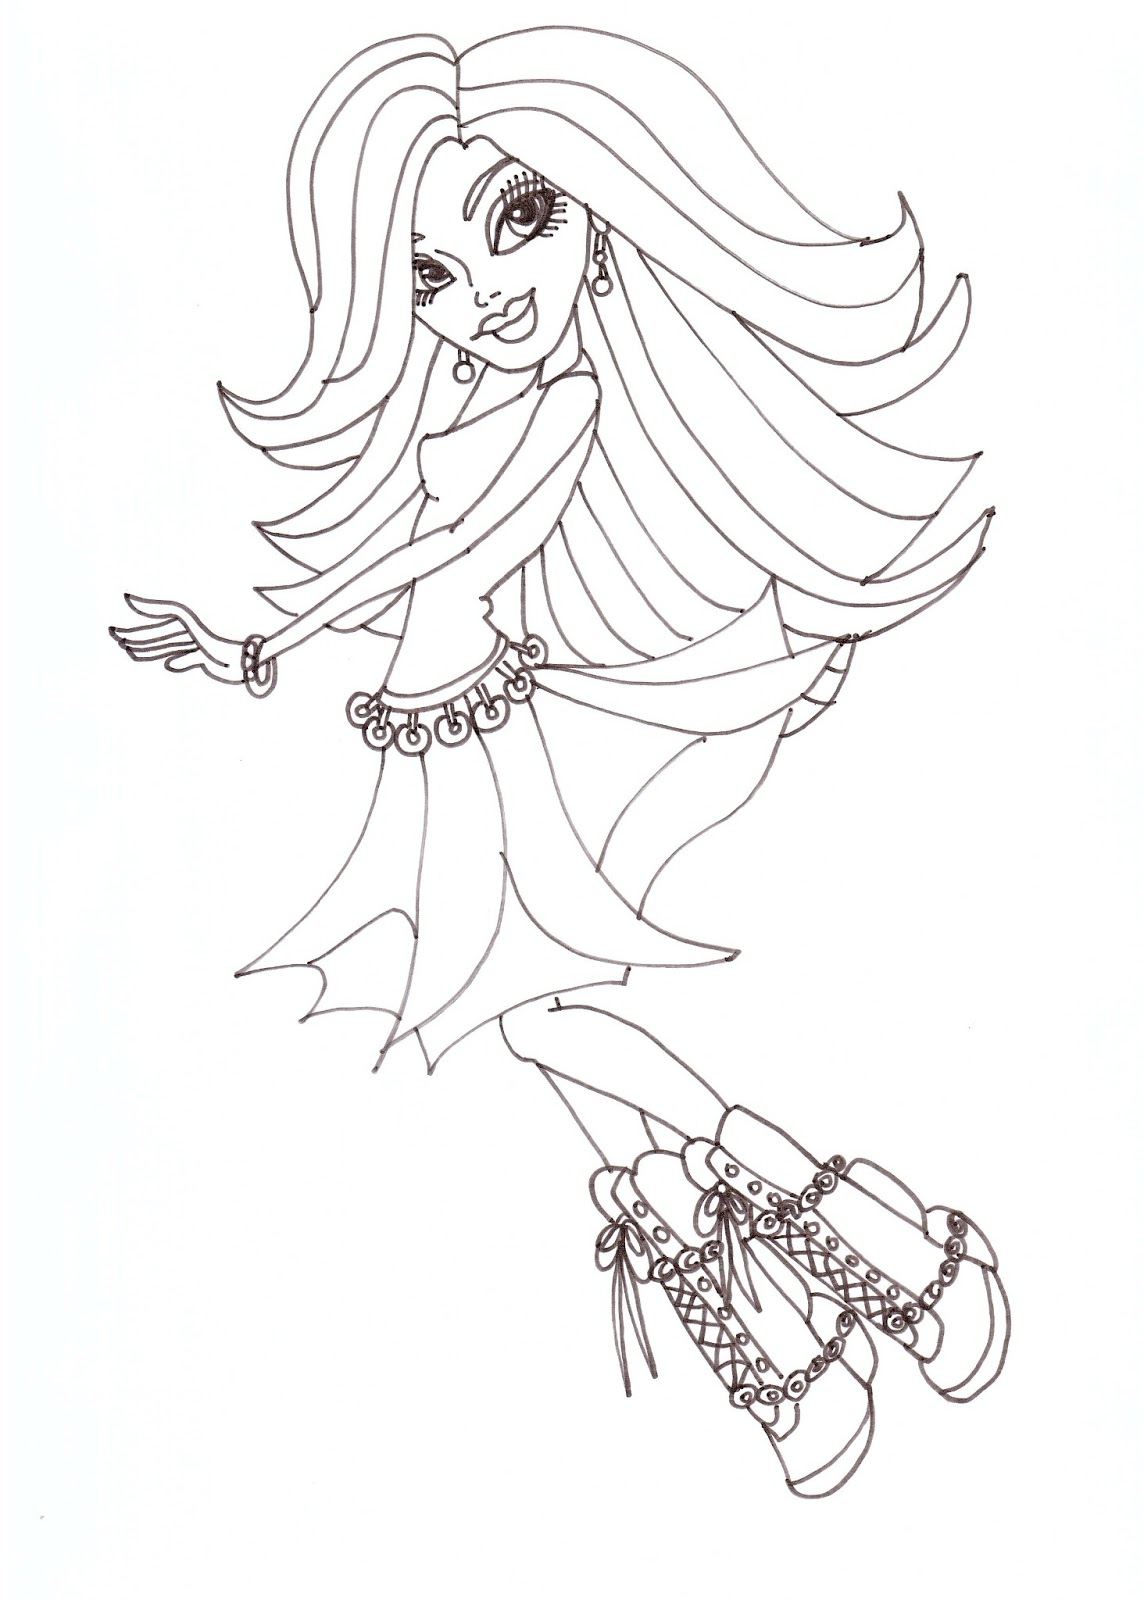 Download Free Printable Monster High Coloring Pages: Spectra Coloring Sheet